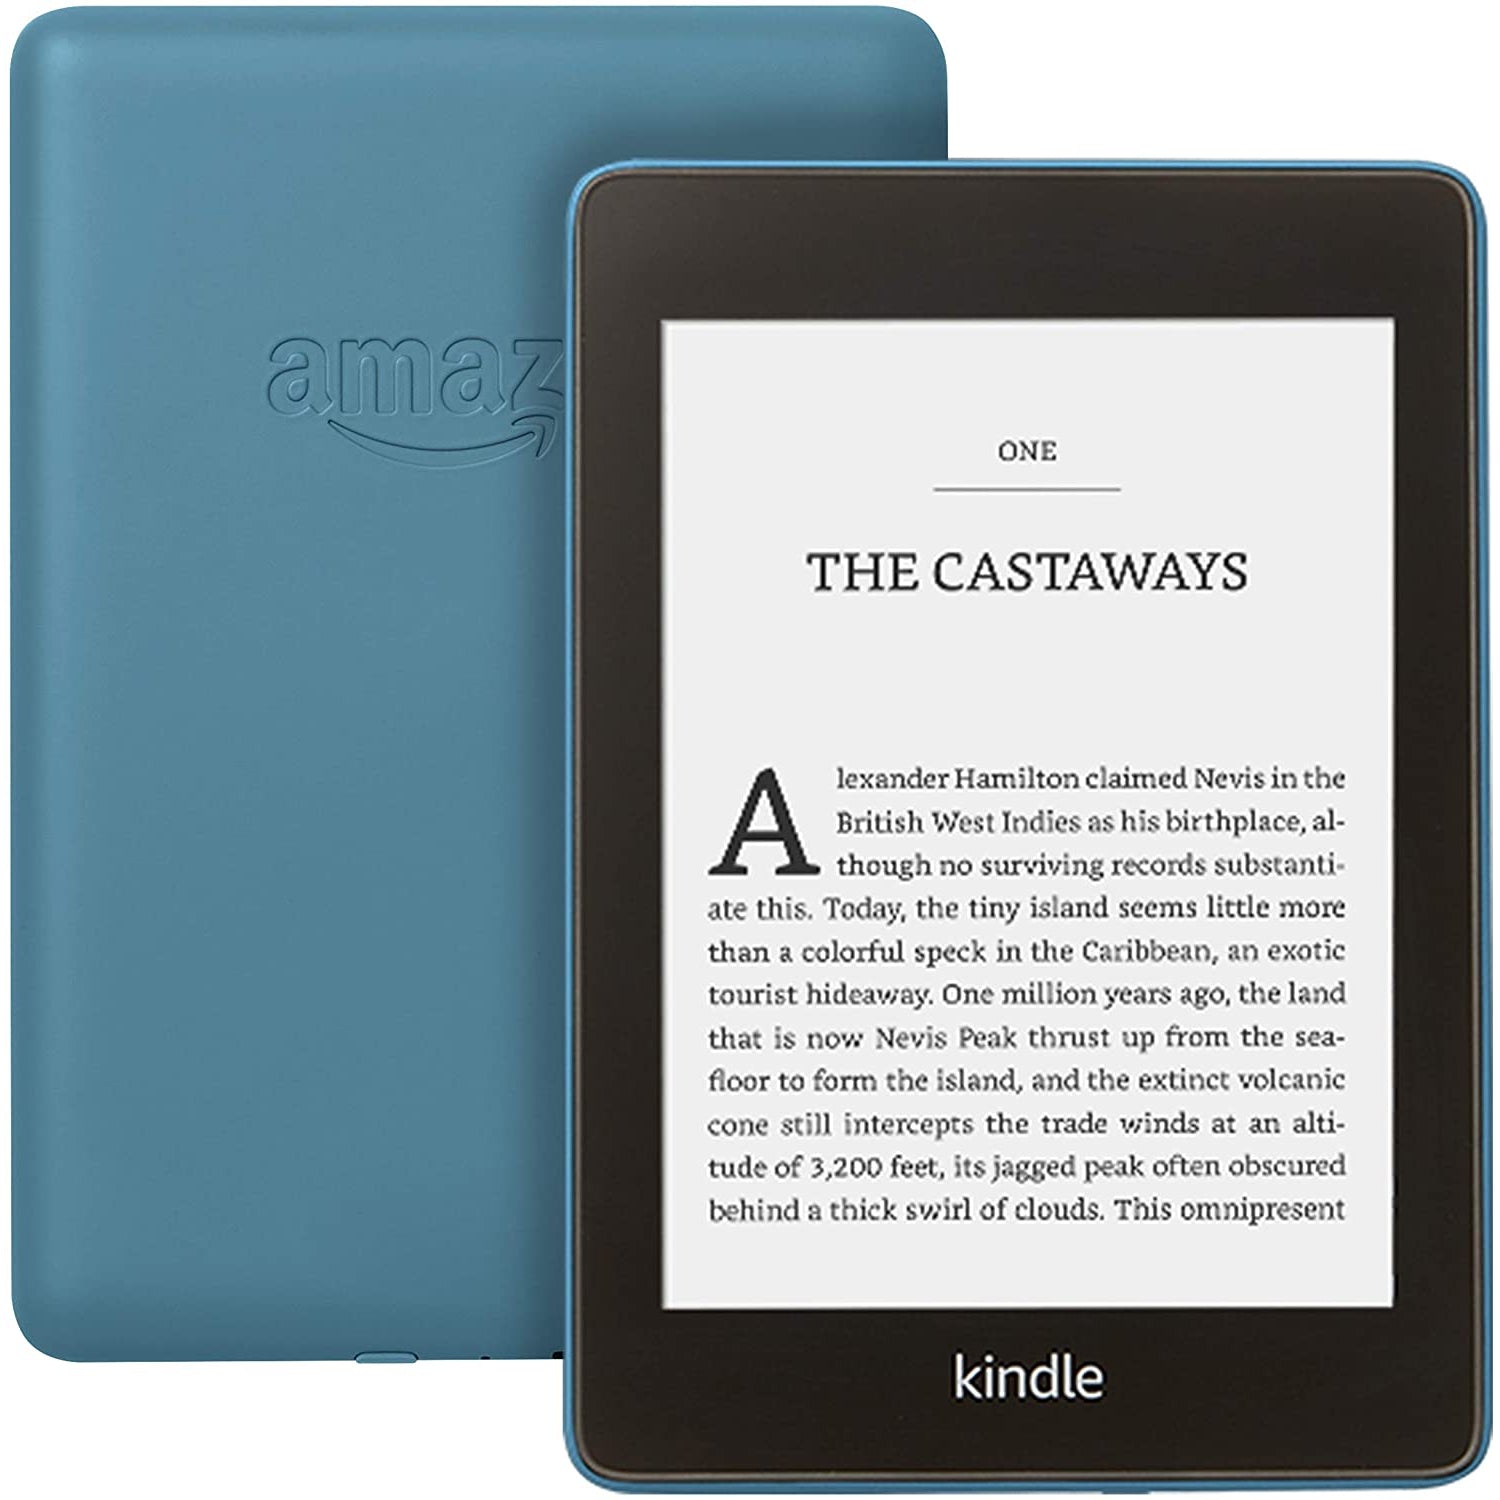 Amazon Kindle Paperwhite (10th Gen) 6" High Resolution Illuminated Touch Screen